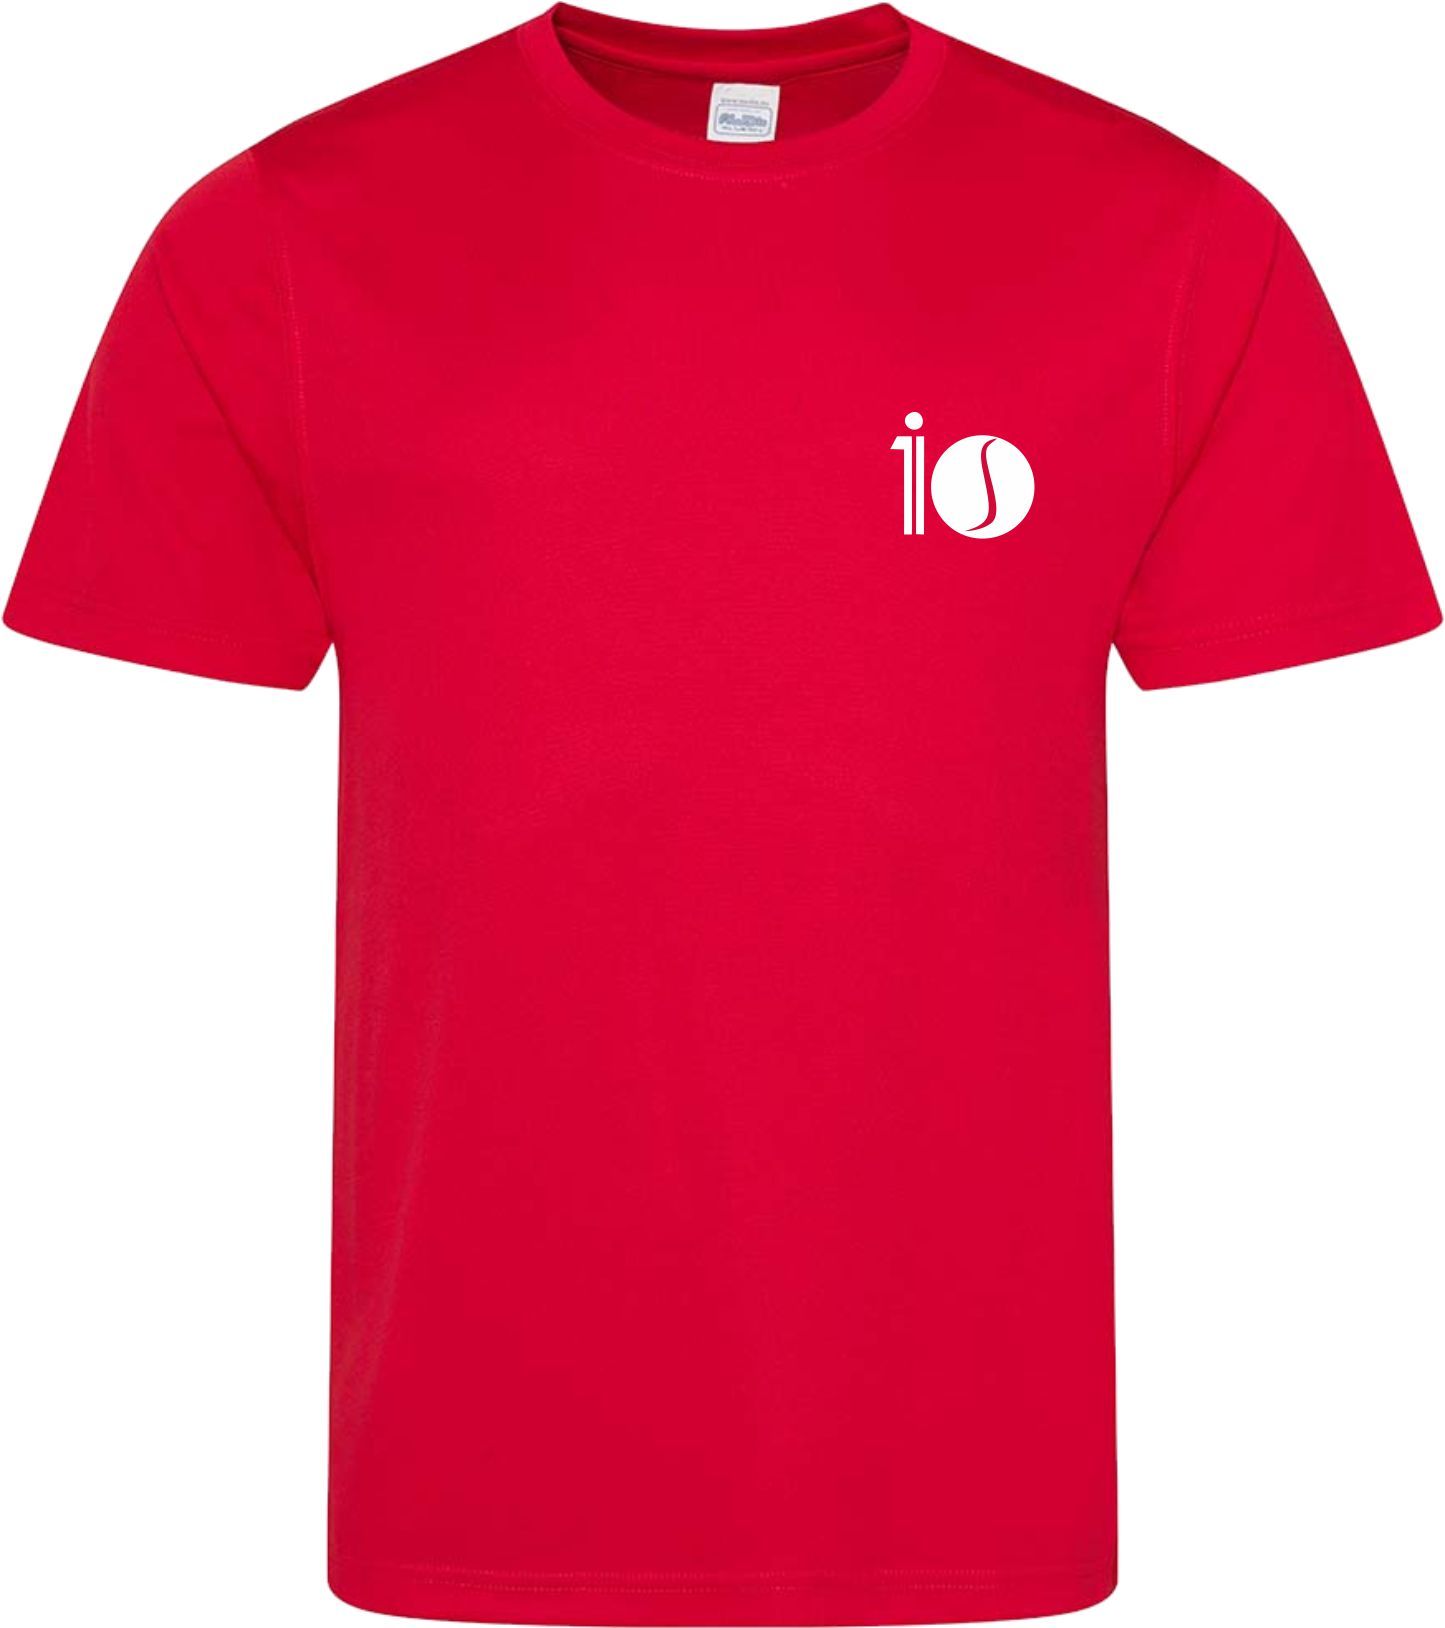 Coaching Staff - 10is Academy Assistant Coach Cool T (unisex)